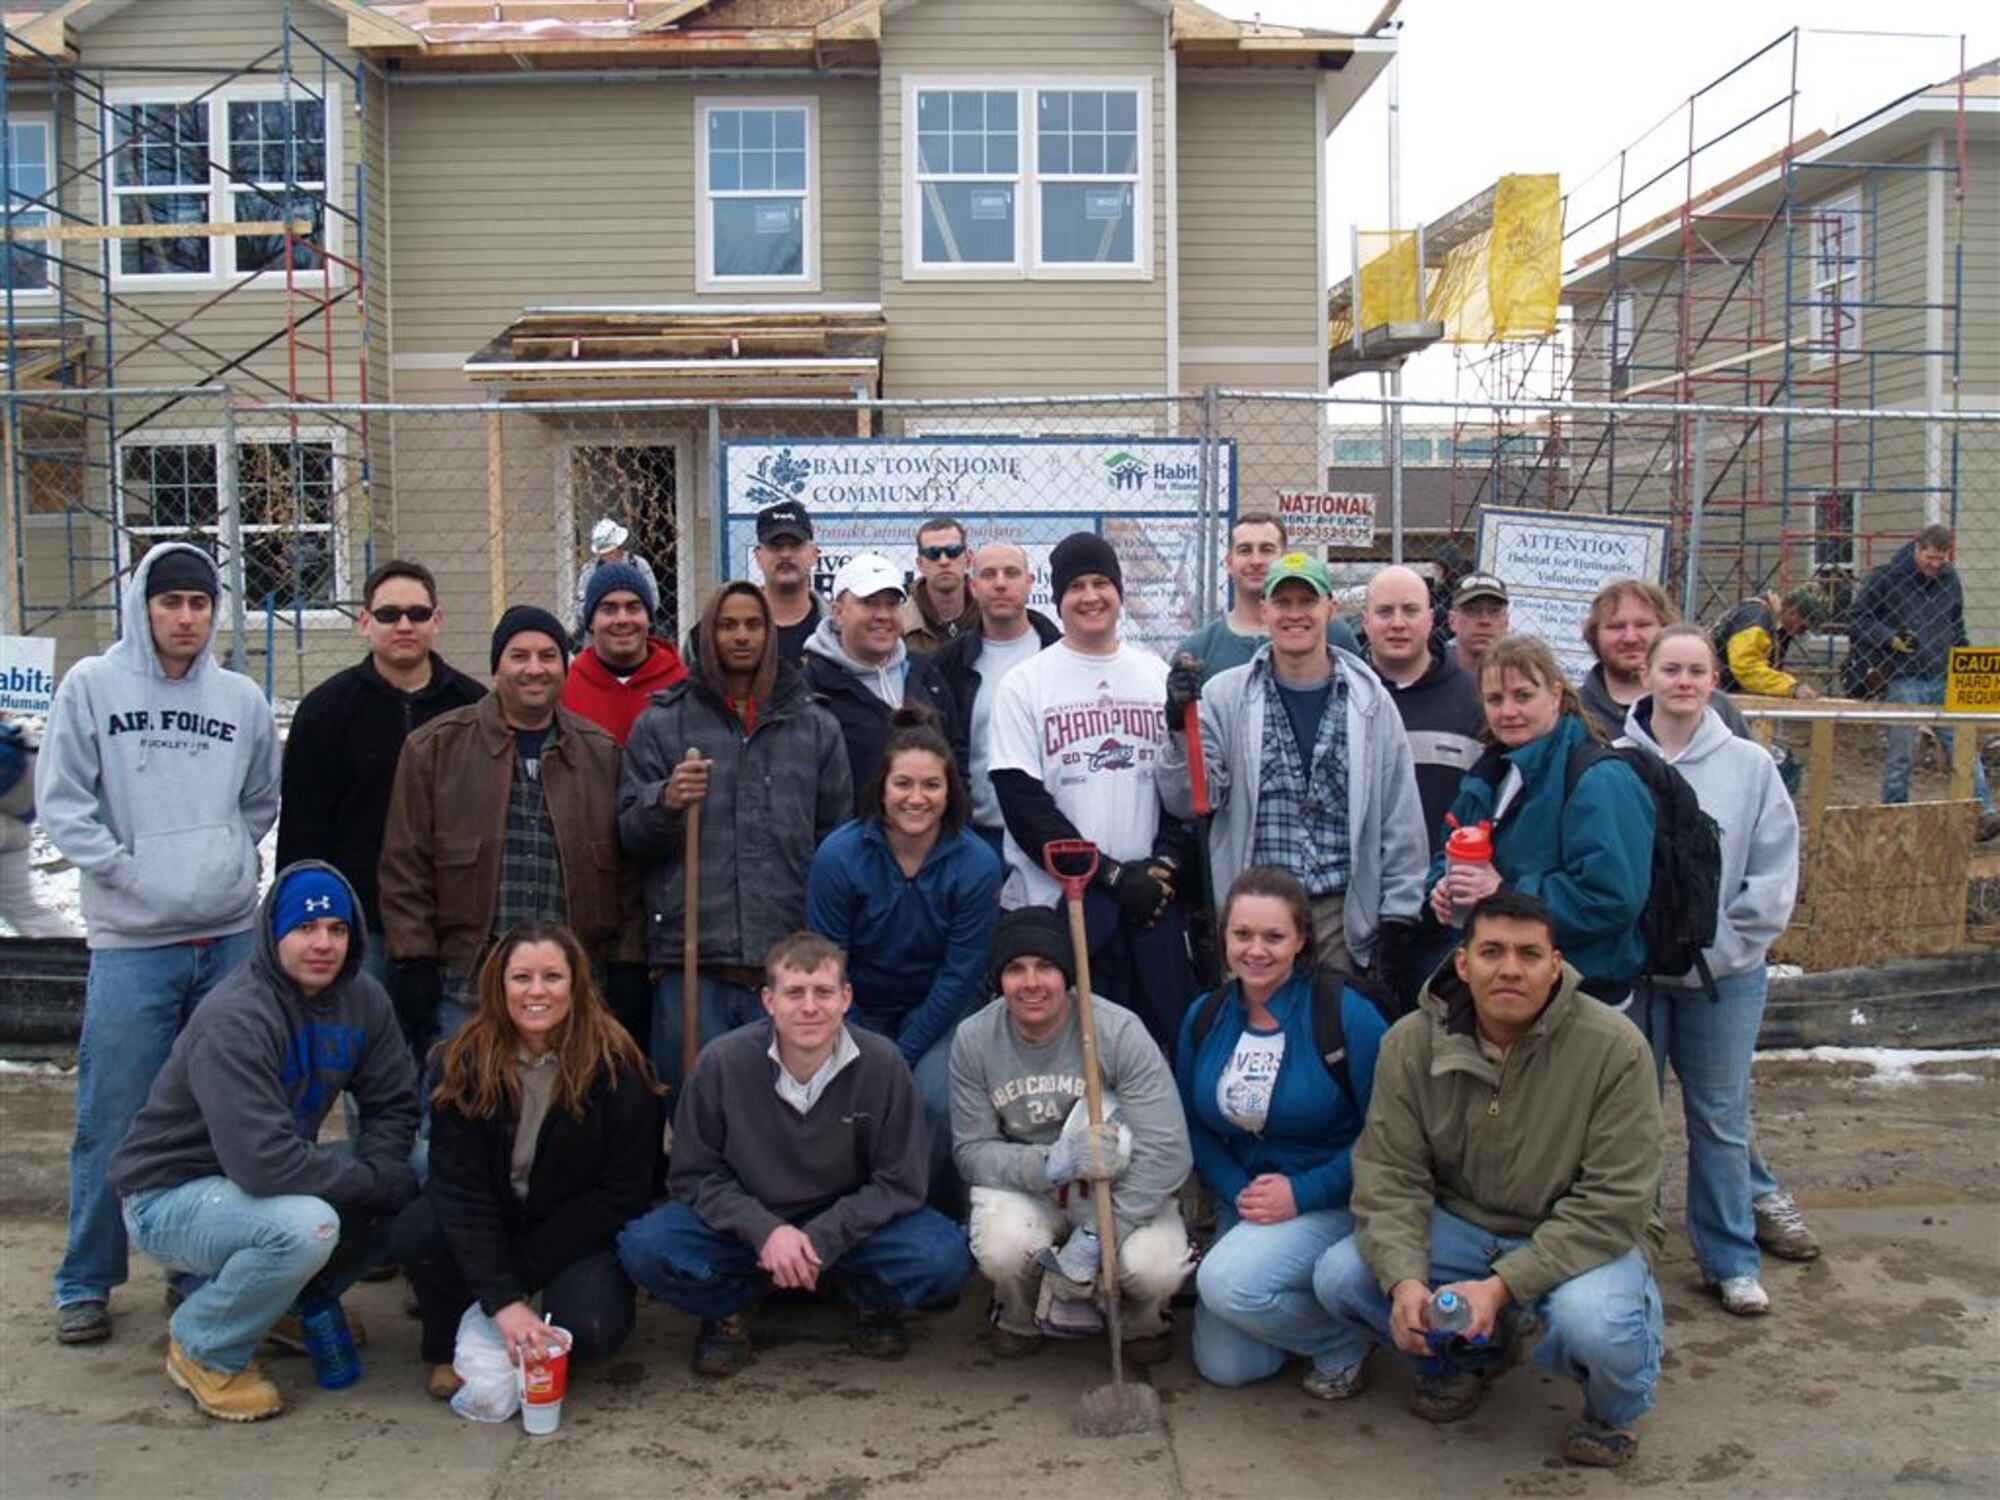 BUCKLEY AIR FORCE BASE, Colo. -- Volunteers from the 566th Intelligence Squadron pose for a group photo at the site of a Habitat for Humanity home build Feb. 12. The 566th IS is a tenant unit on Buckley Air Force Base. (U.S. Air Force photo)